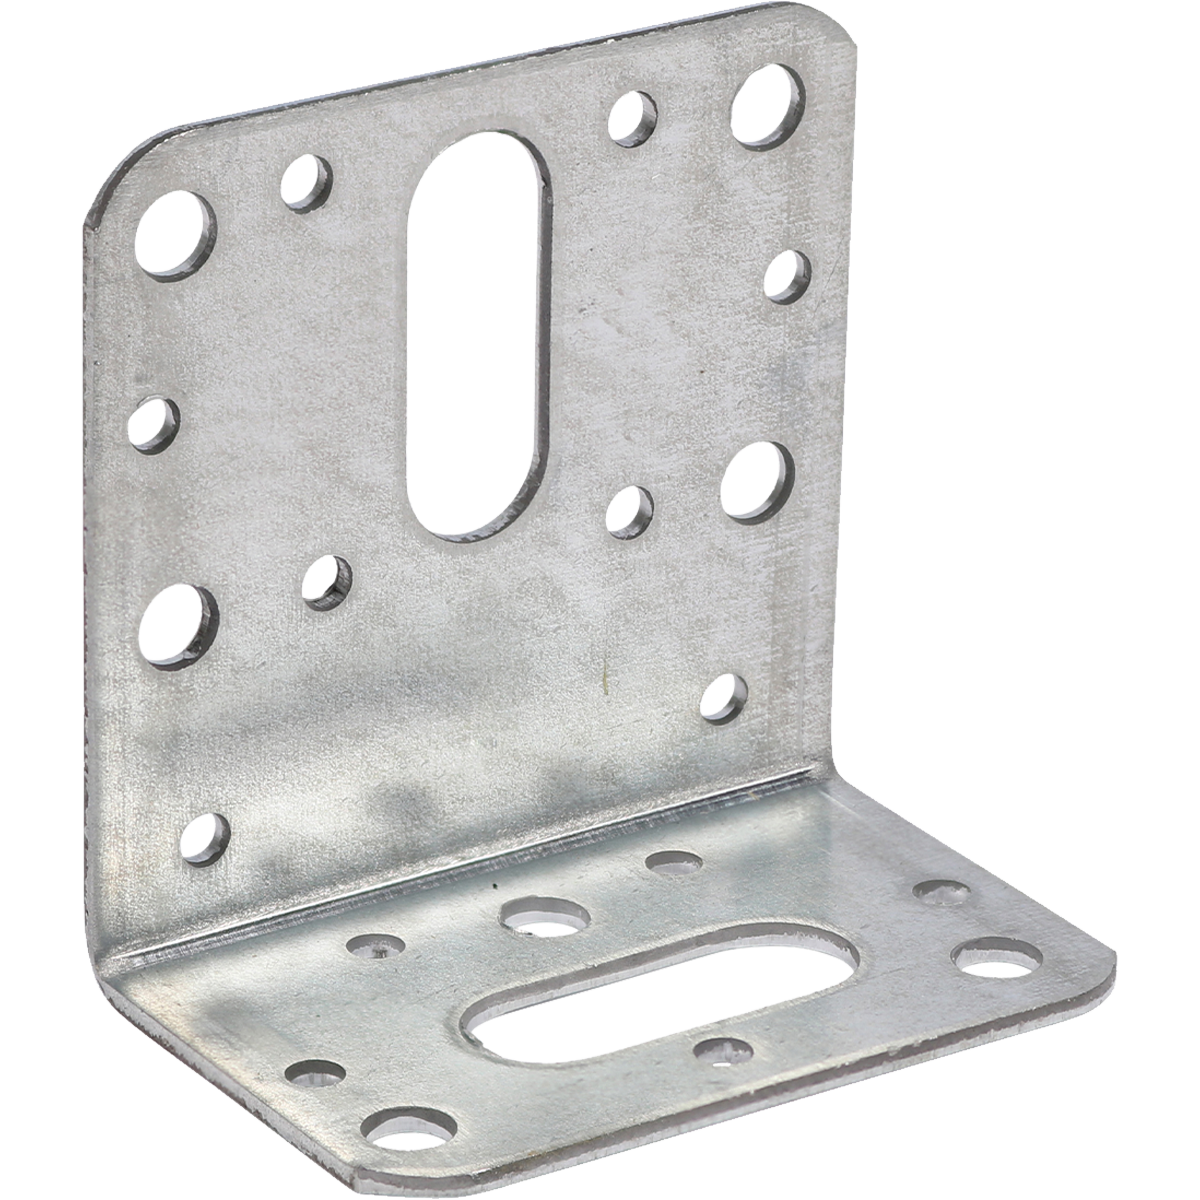 Corrosion resistant metal angle brackets in a variety of sizes